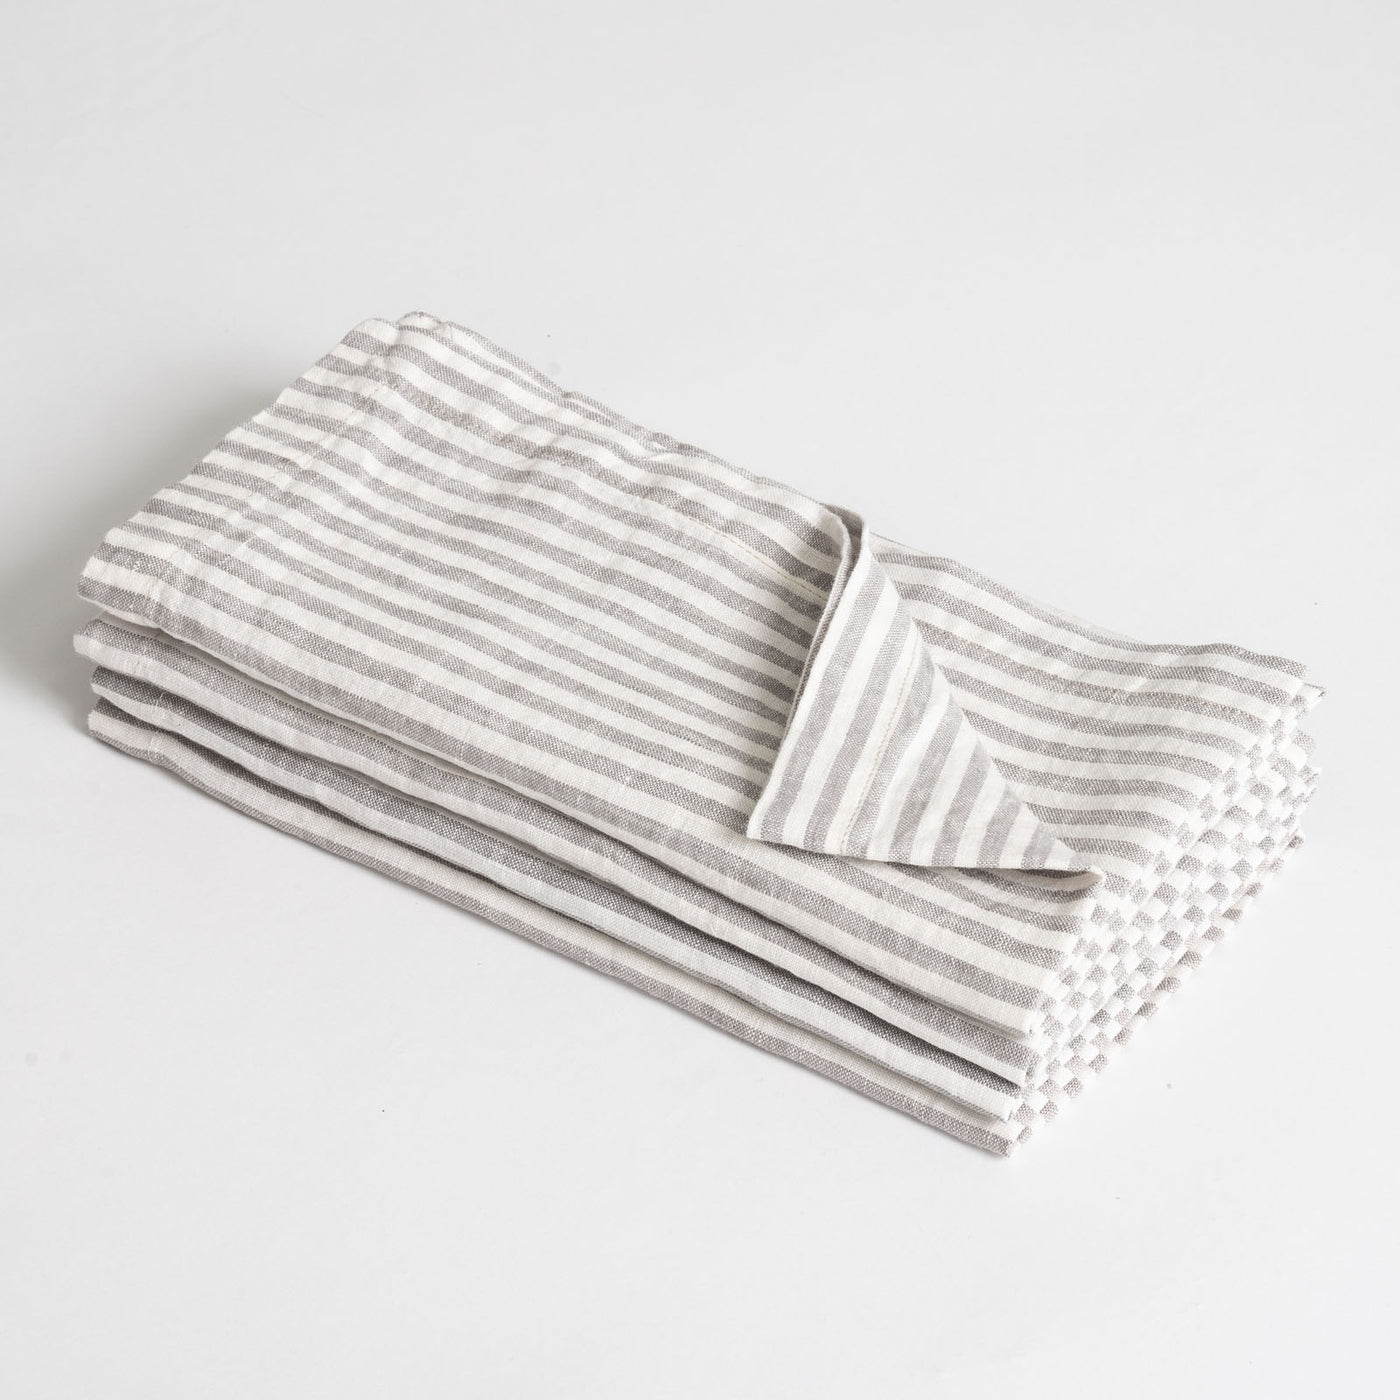 French Flax Linen Napkins (Set of 4) in Grey Stripe